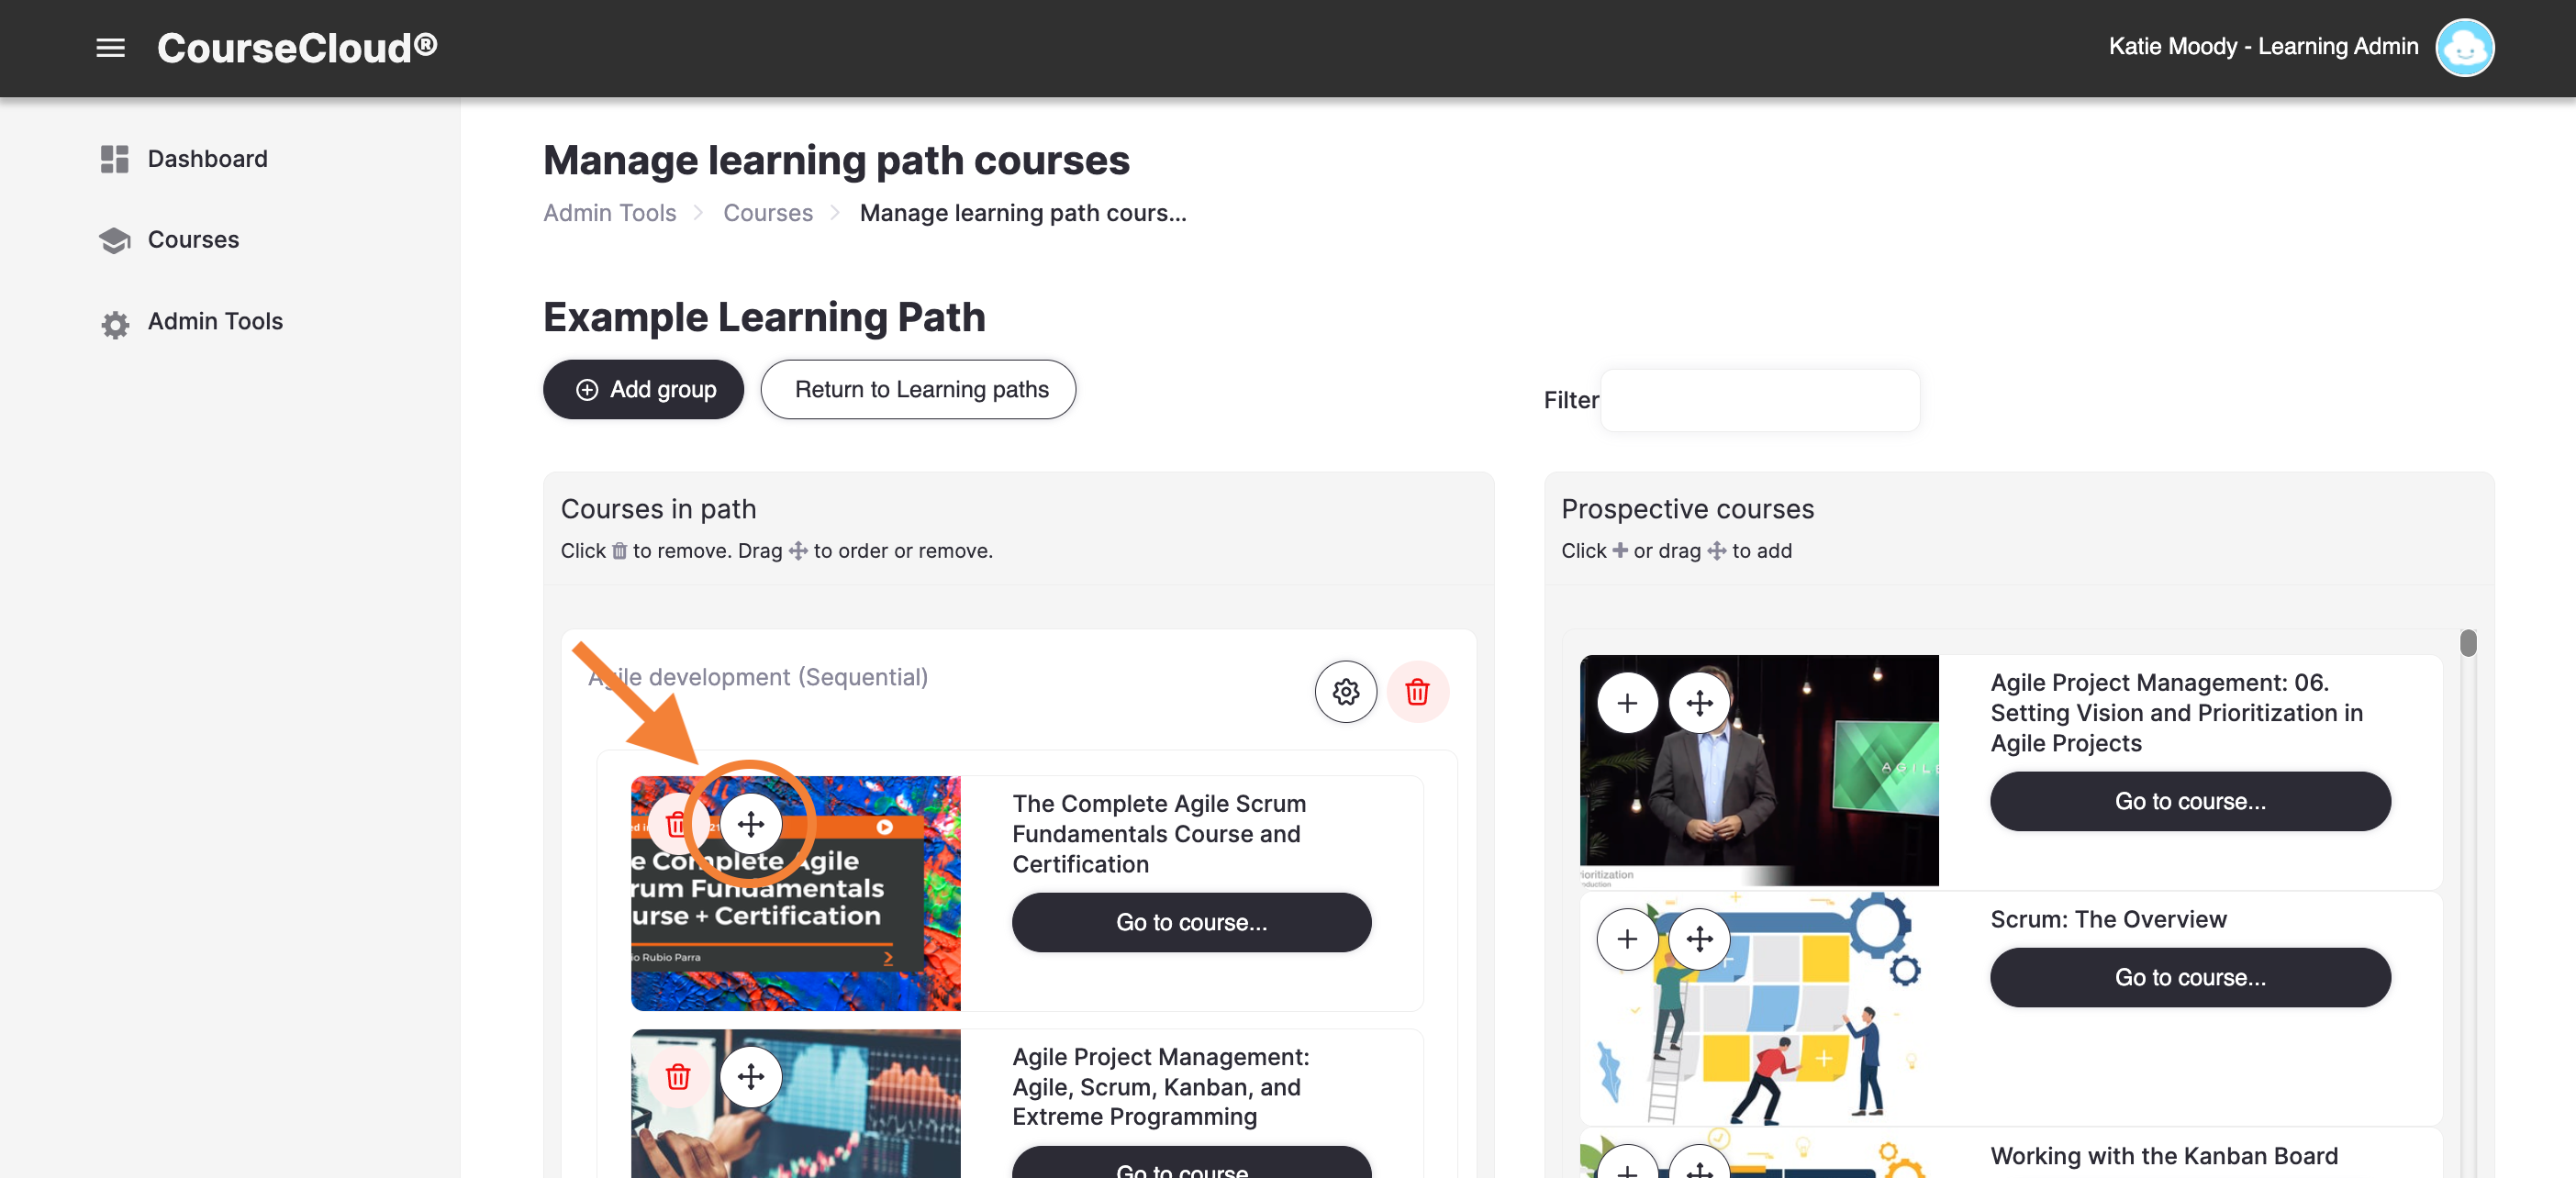 20_-_The_Manage_Learning_Path_Courses_page__indicating_an_example_course_s_Move_icon.png